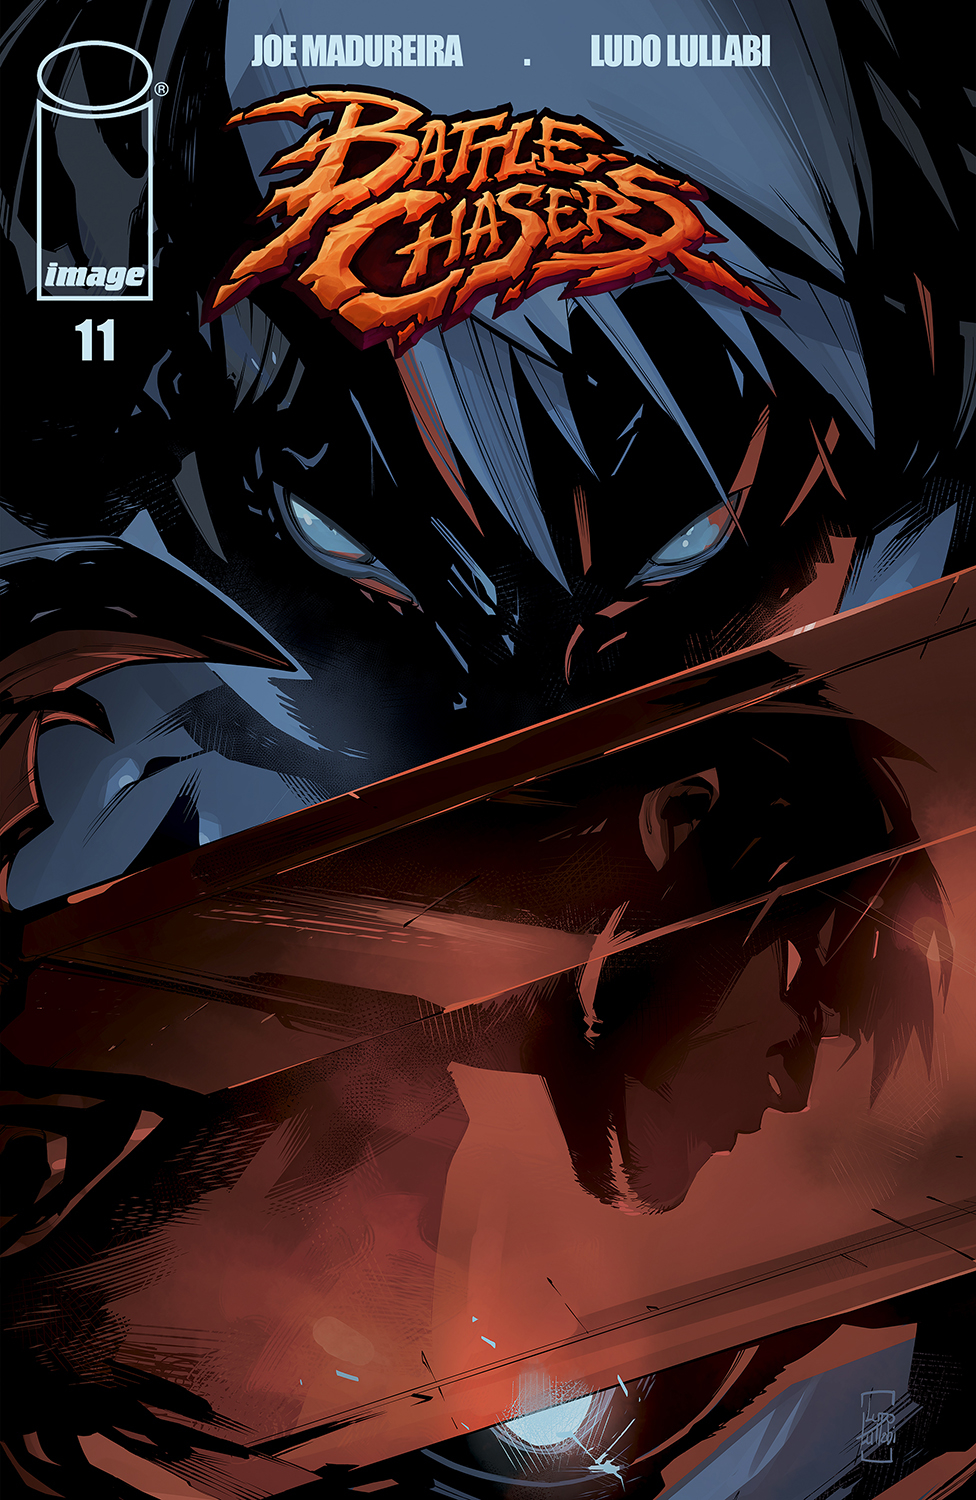 Battle Chasers #11 Cover A Lullabi (Mature)